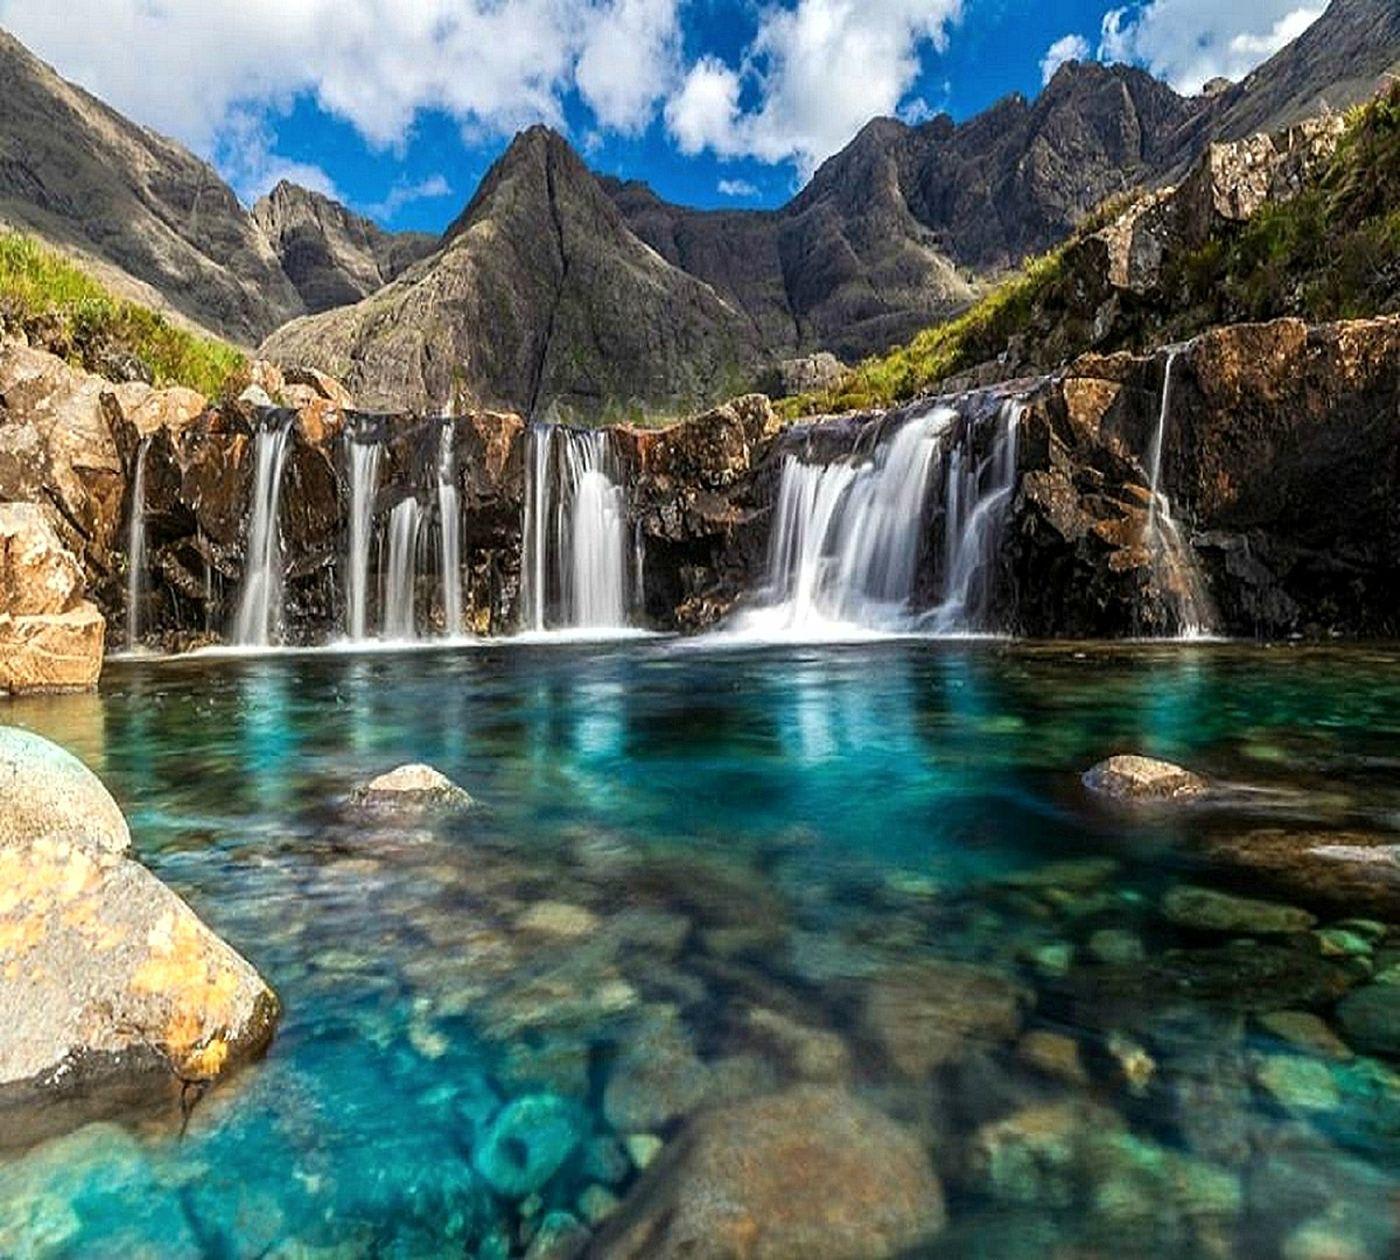 The Fairy Pools in Scotland